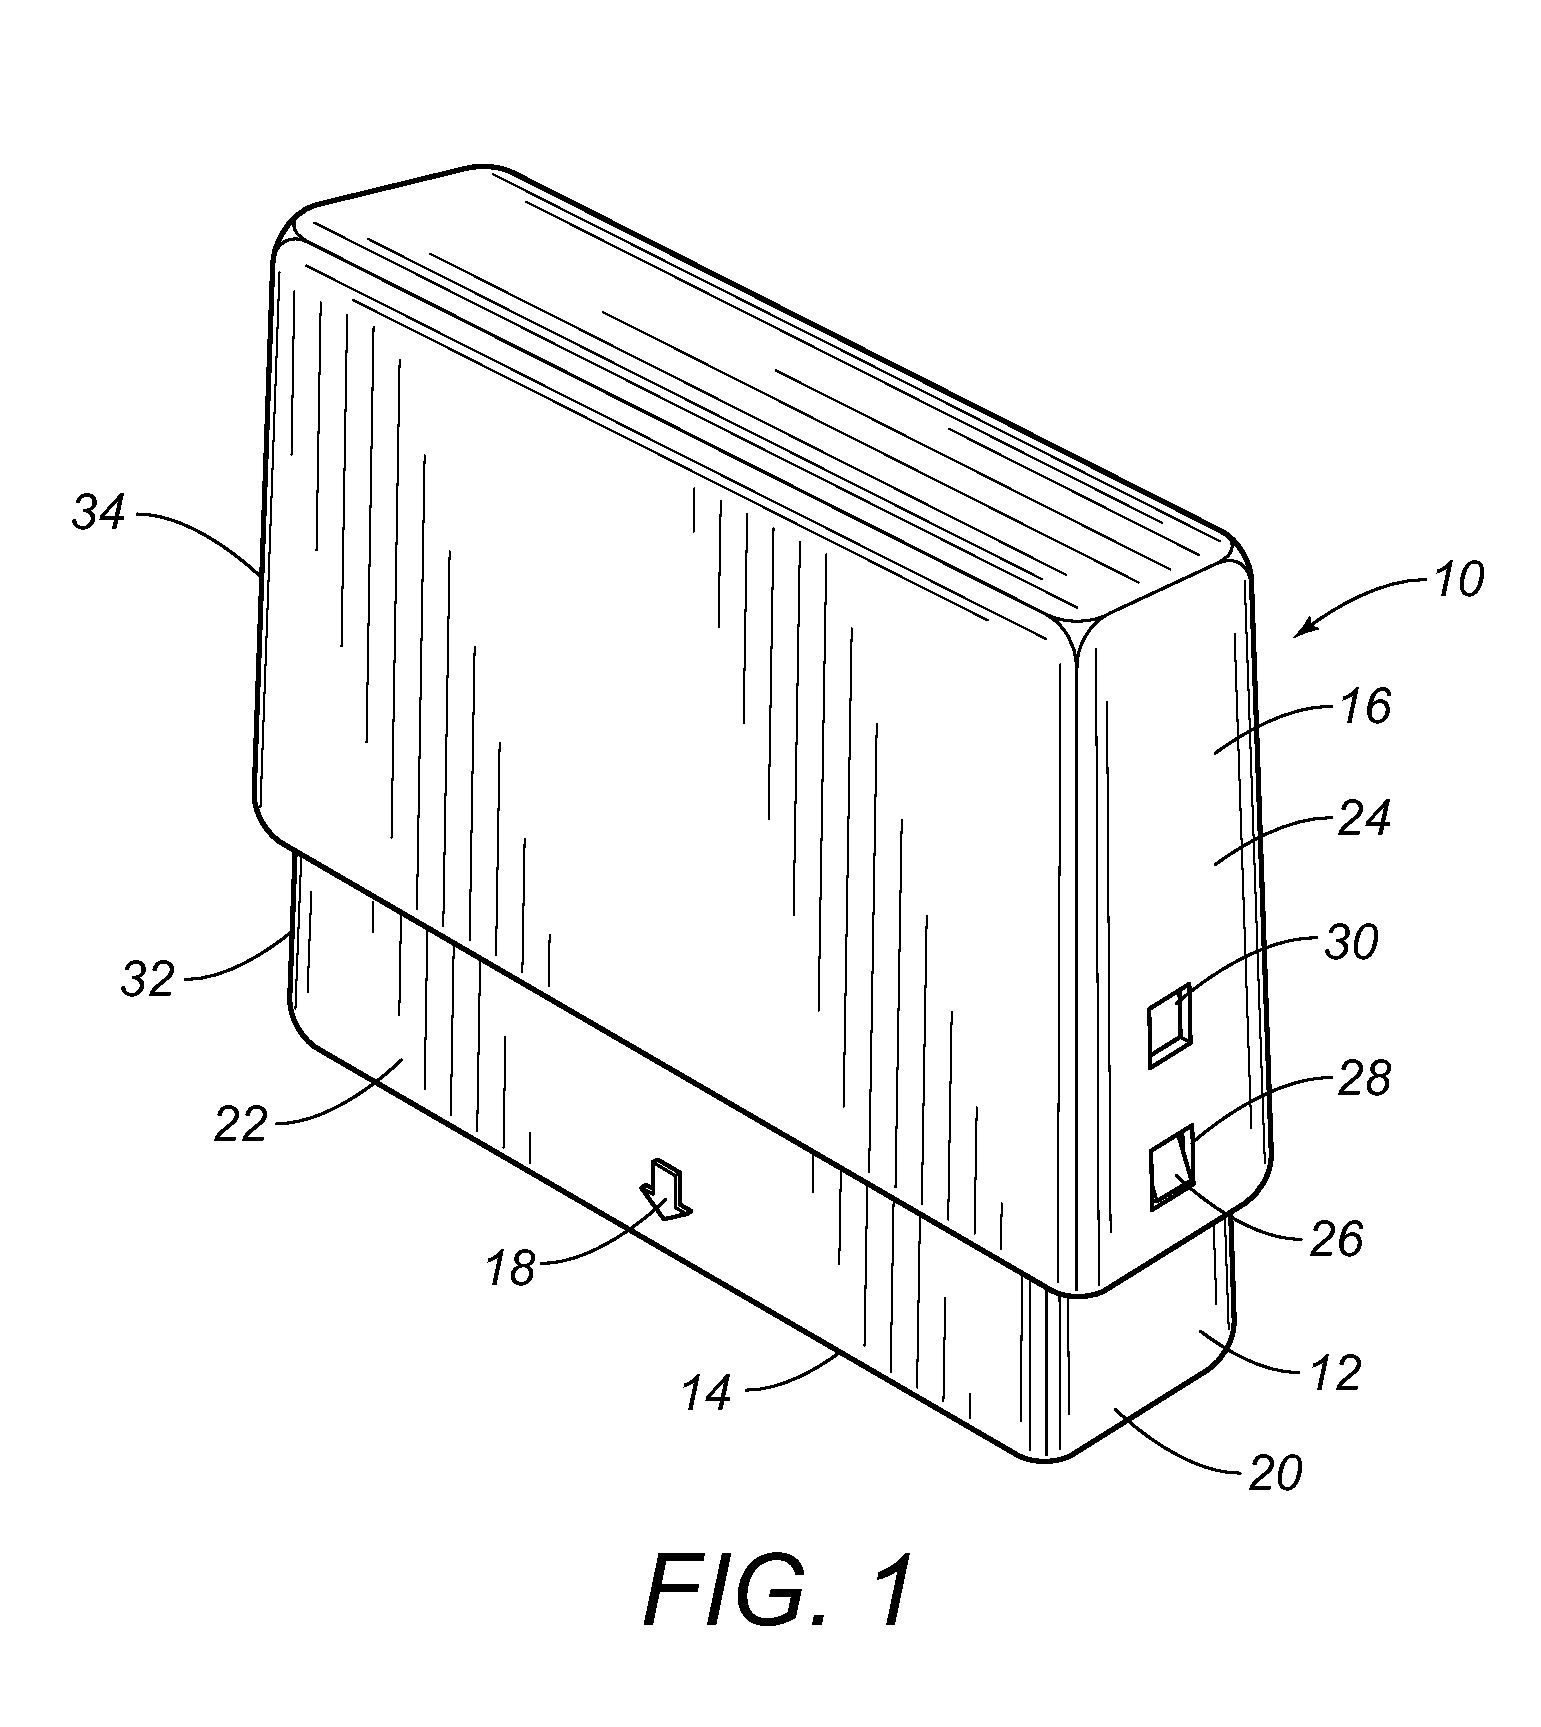 Load-controlled auto-actuated skin incision device